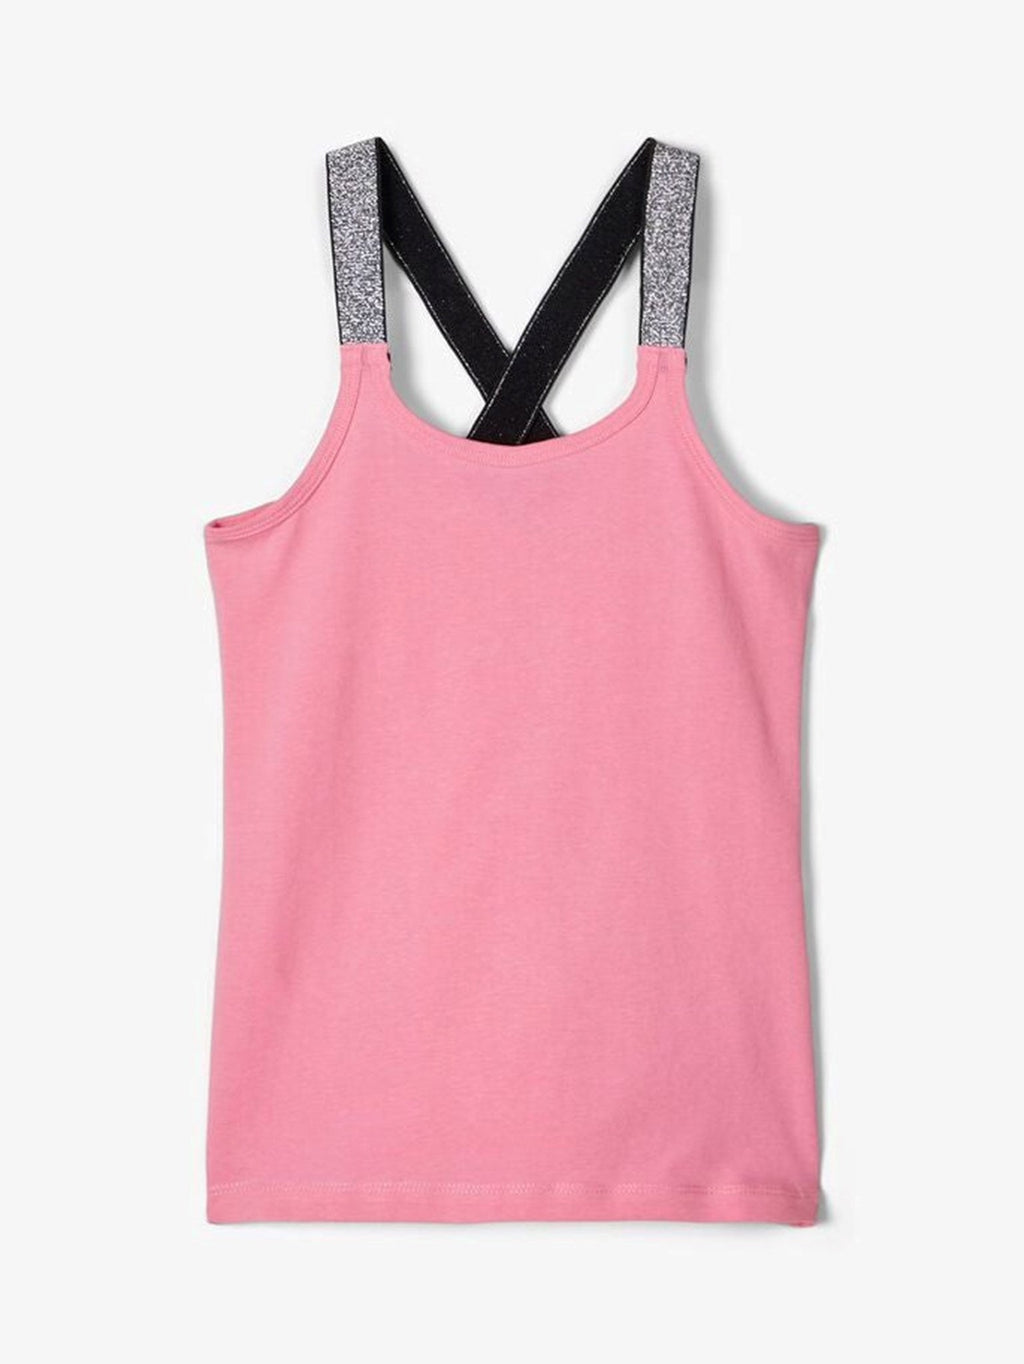 Top with glitter details - Pink